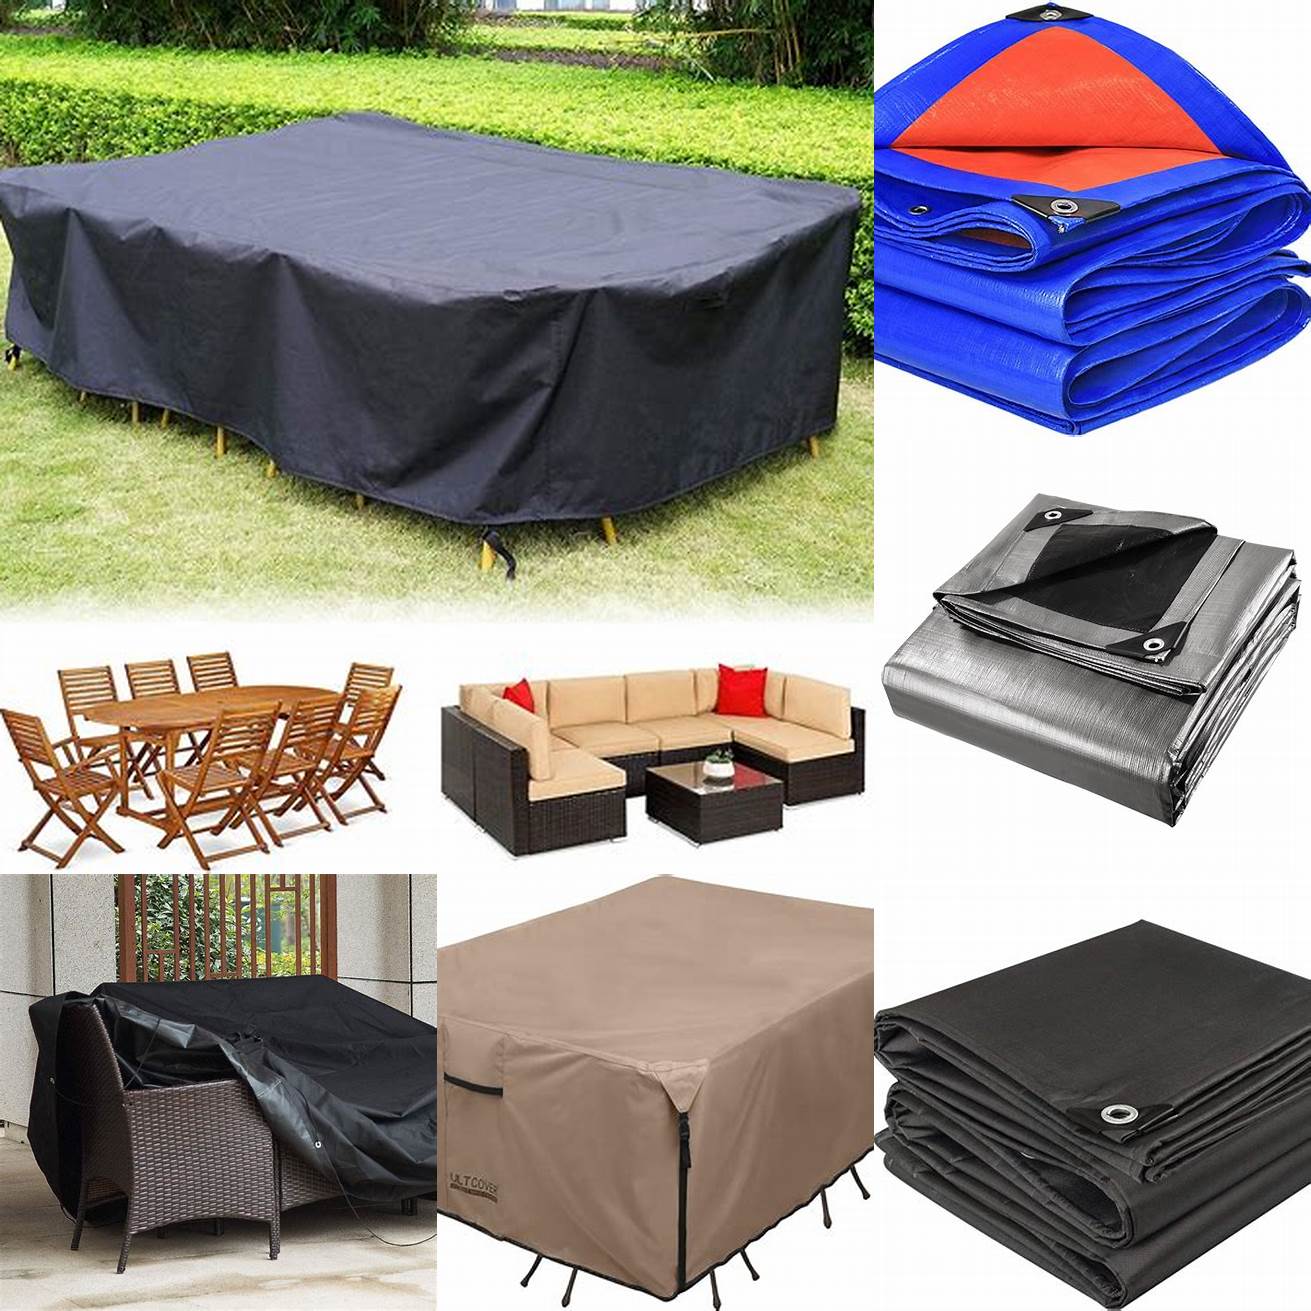 A picture of a person covering RHF Divano Teak furniture with a waterproof cover or tarp